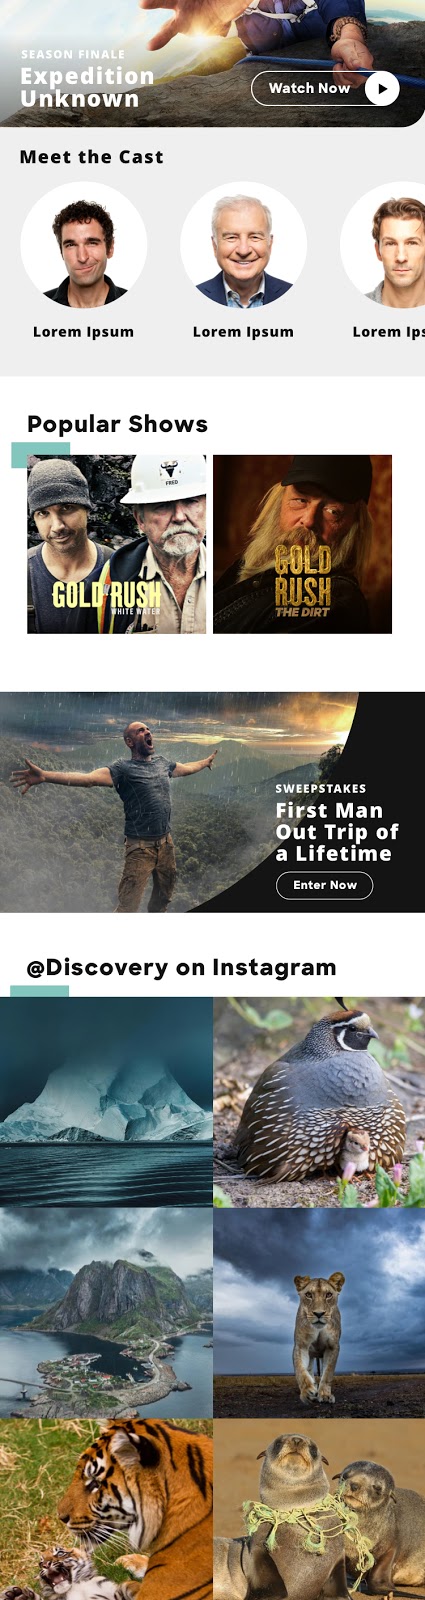 Discovery mobile website design